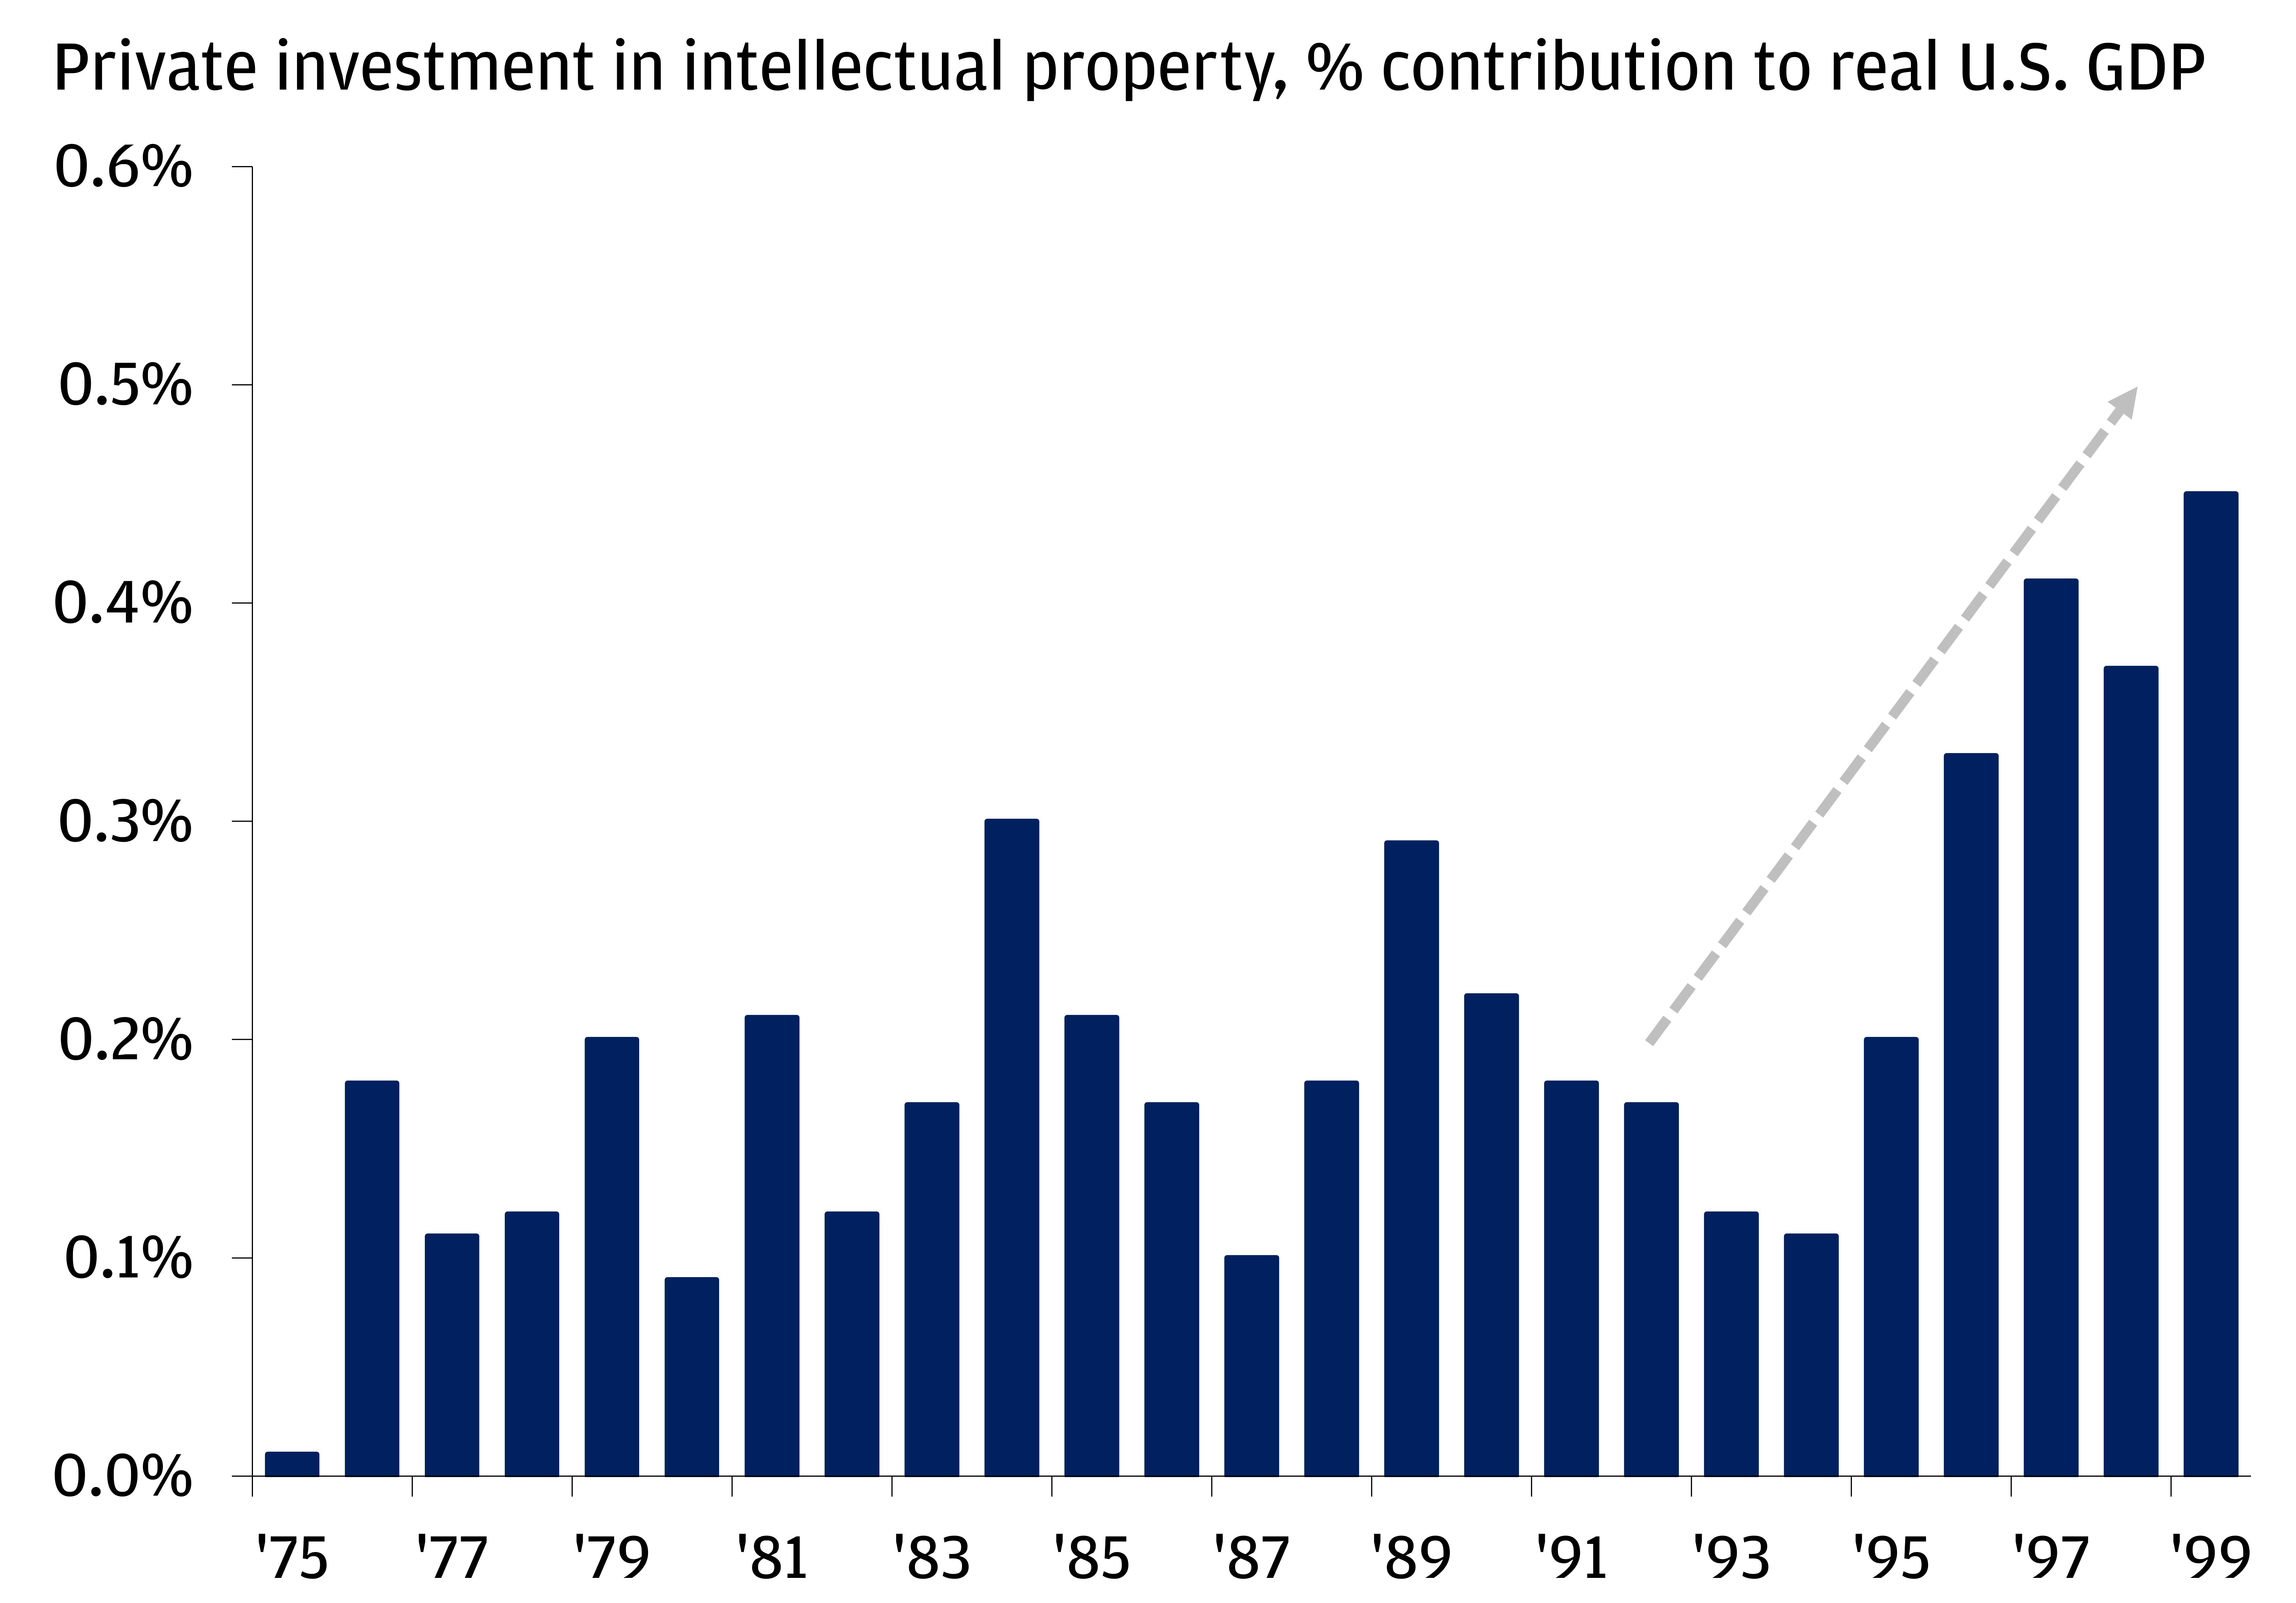 This chart shows private investment in intellectual property as a percentage of U.S. GDP from 1975 to 1999.